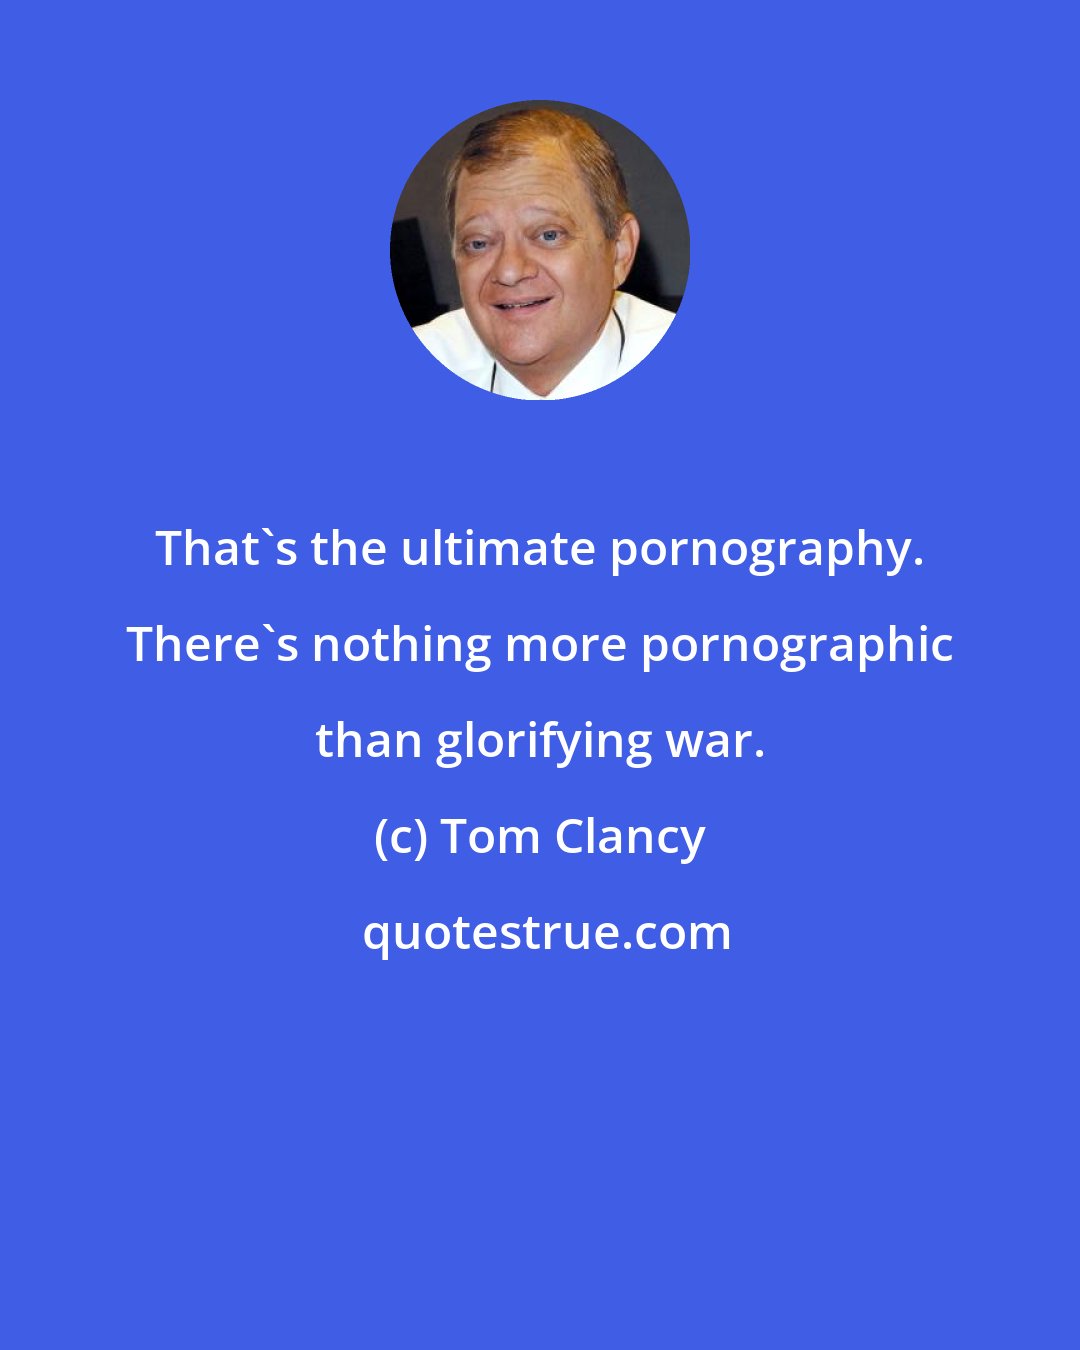 Tom Clancy: That's the ultimate pornography. There's nothing more pornographic than glorifying war.